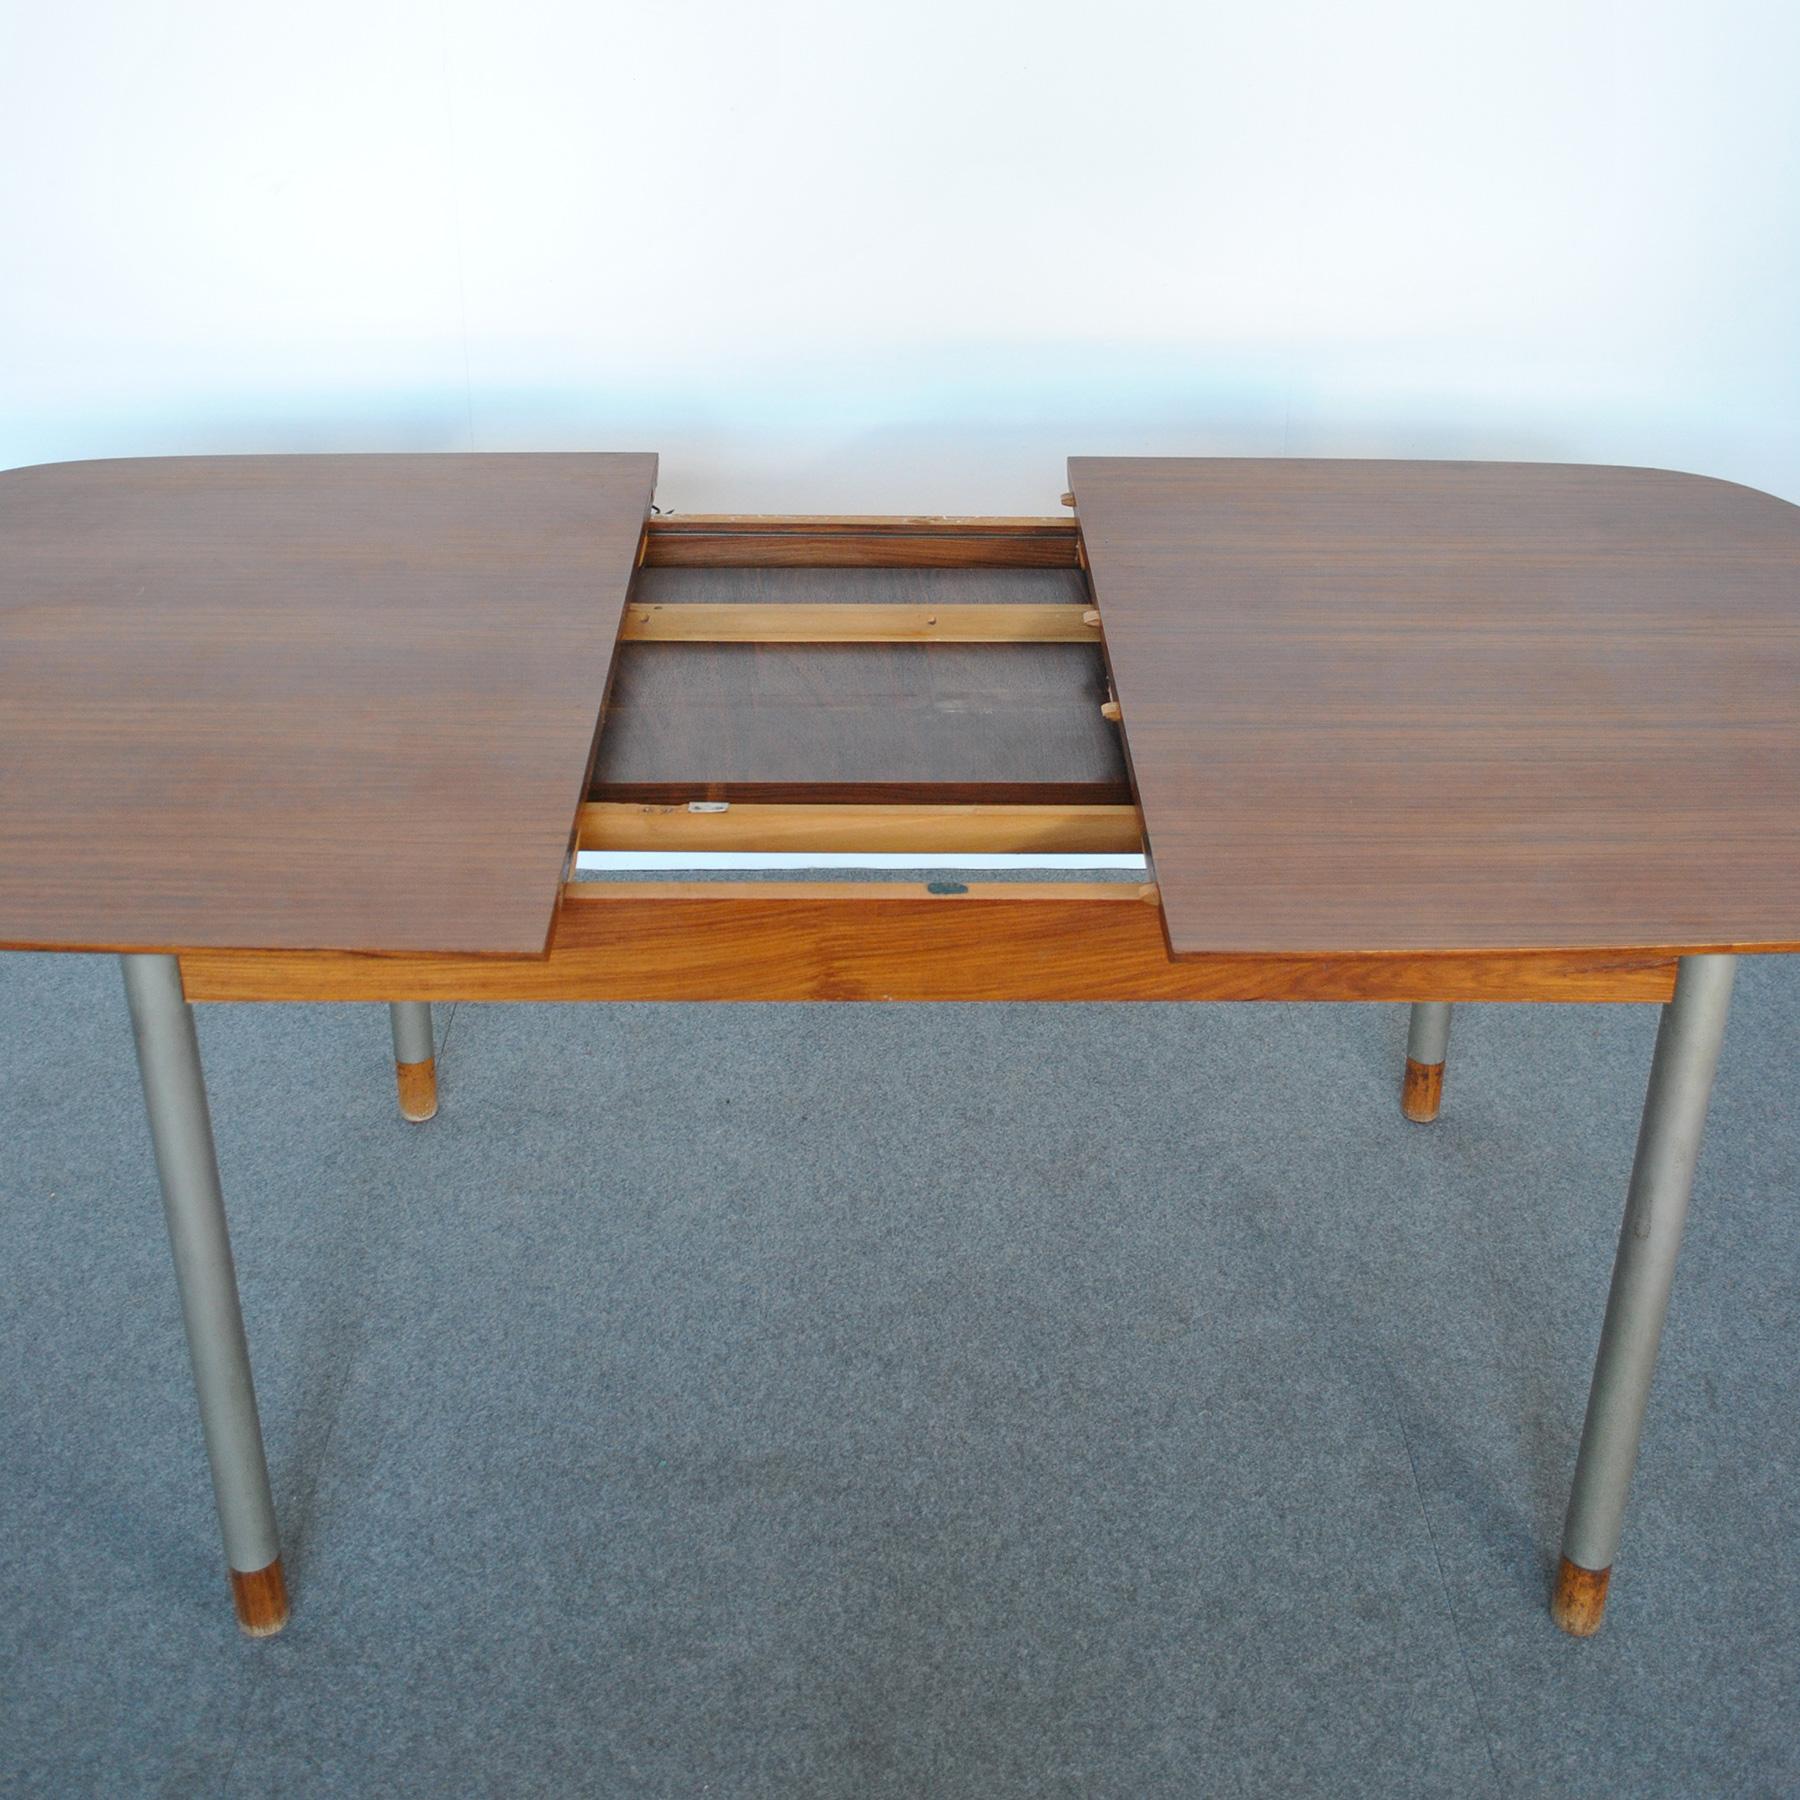 George Coslin Openable Wooden Table, Mid-Sixties For Sale 1